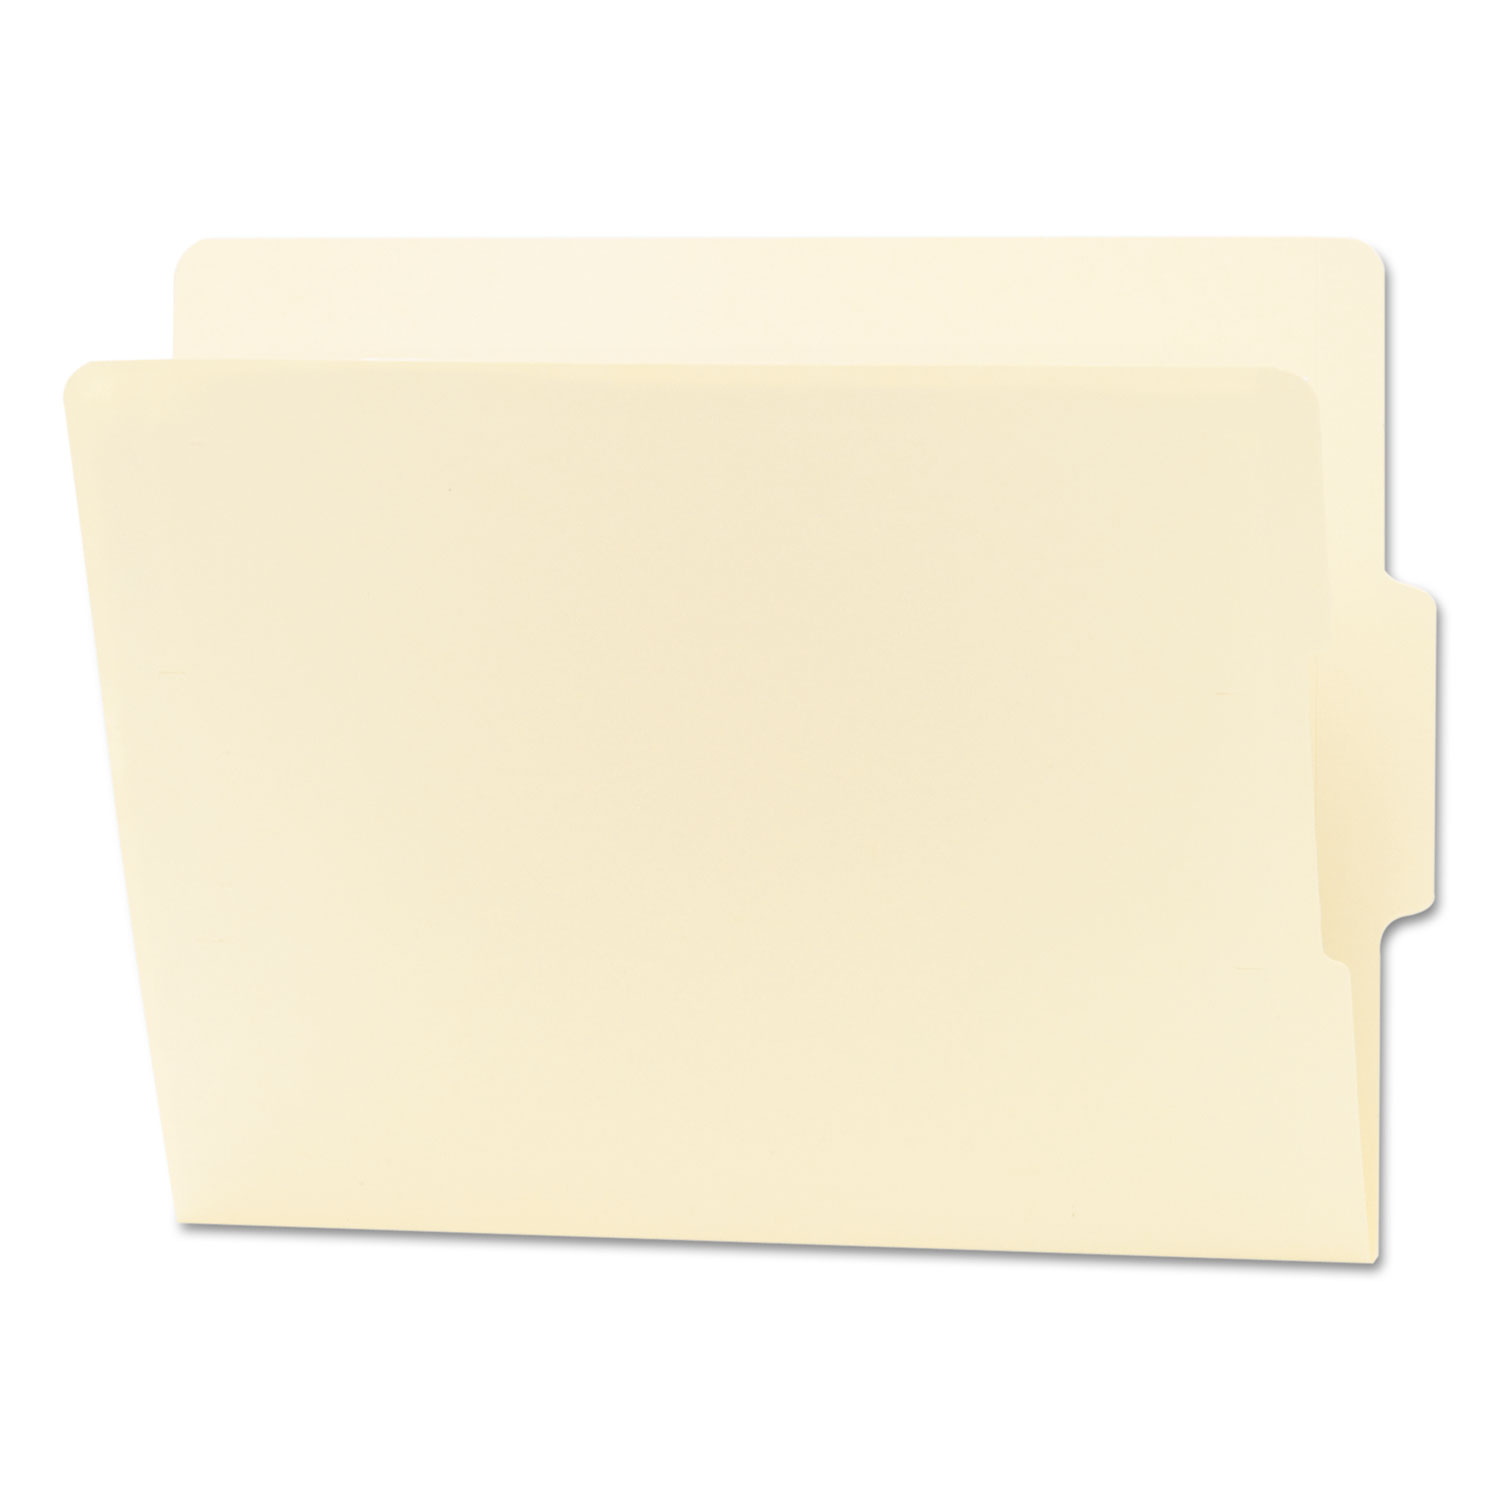  Smead 24136 Heavyweight Manila End Tab Folders, 9 Front, 1/3-Cut Tabs, Center Position, Letter Size, 100/Box (SMD24136) 